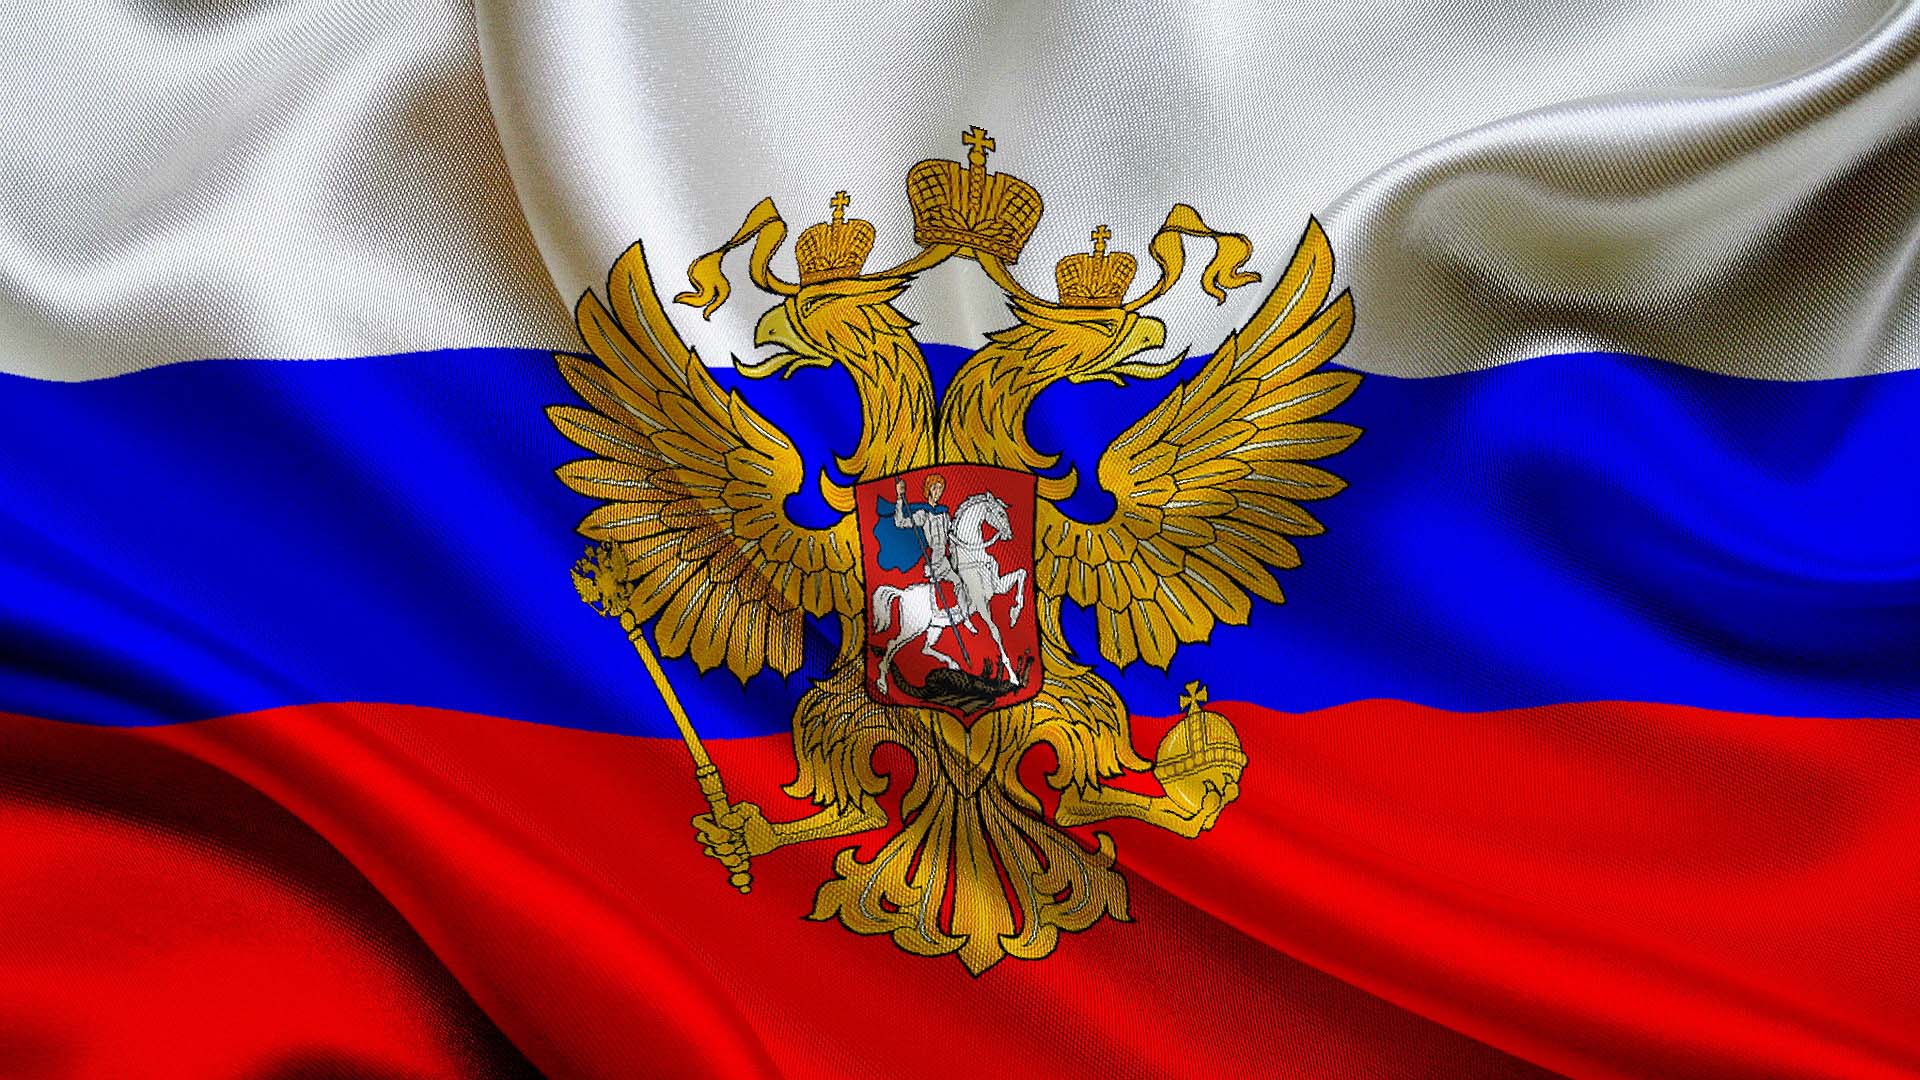 Big Russian Flag Wallpaper For Desktop Daily Background In HD